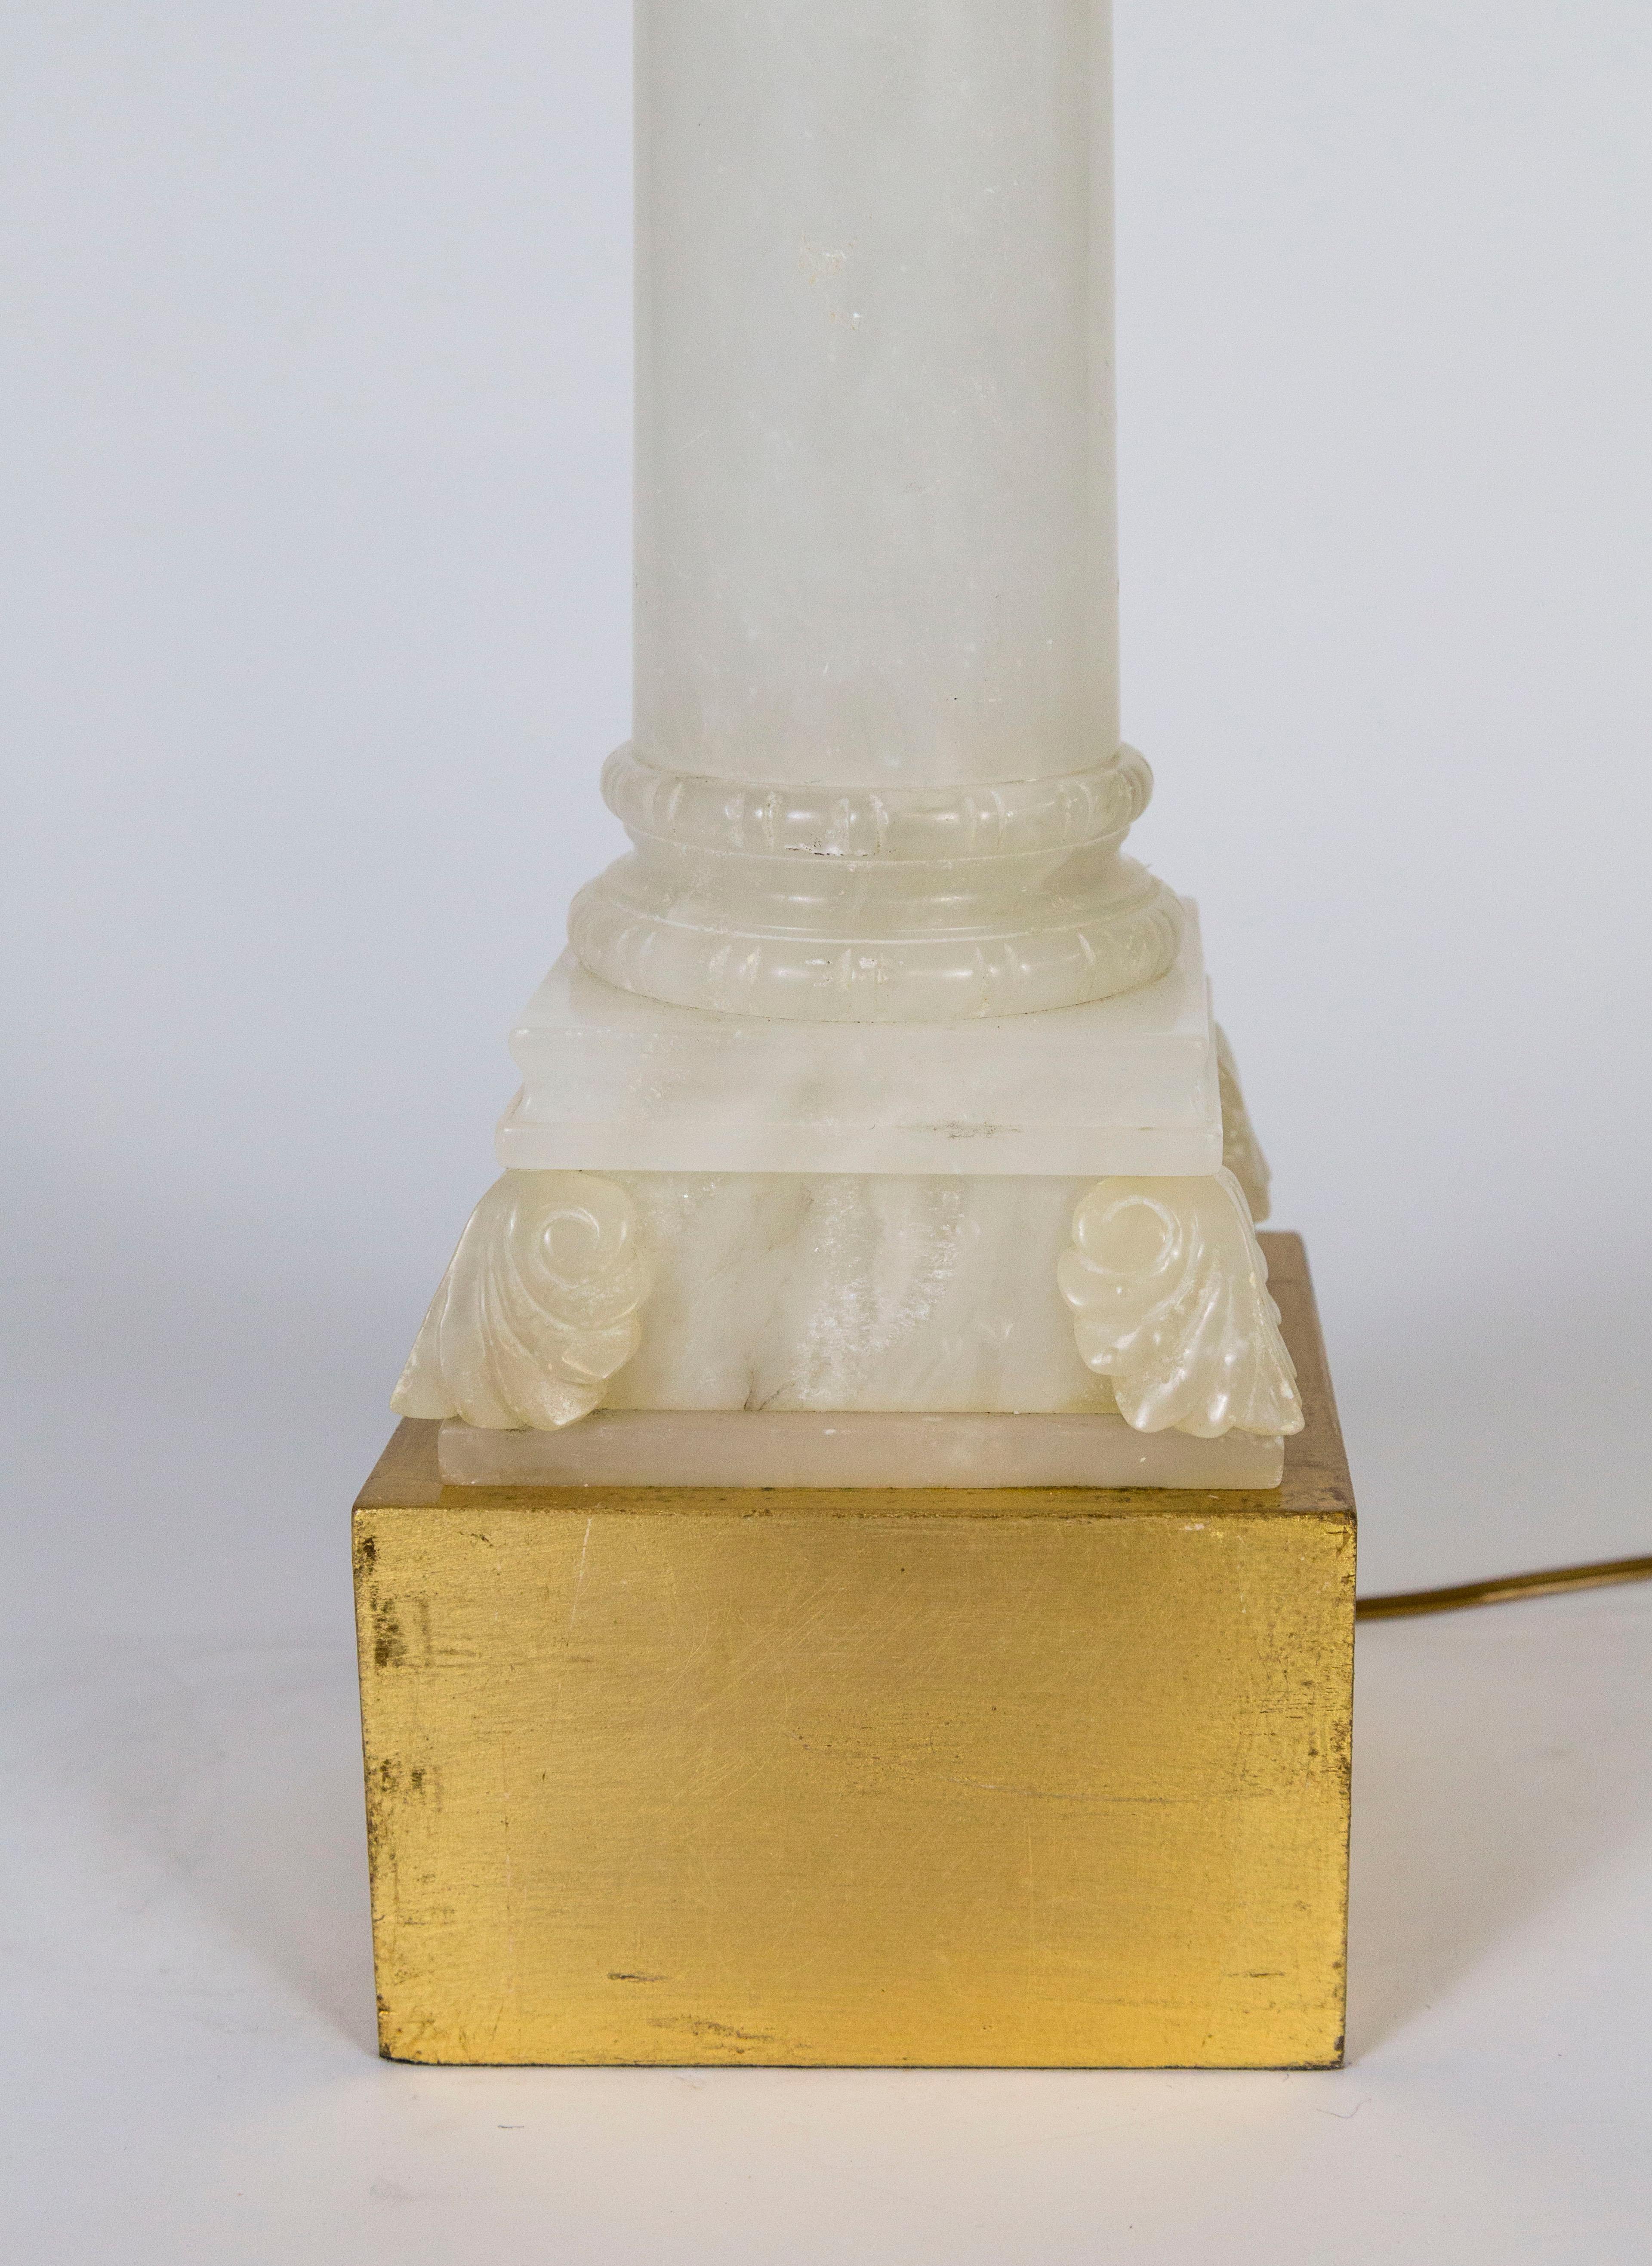 A gorgeous, polished, alabaster lamp in the form of a column with an acanthus leaf adorned capital. With an elevated, square, gilt base and neck. Measures: 30” height x 6” x 6.25.”.